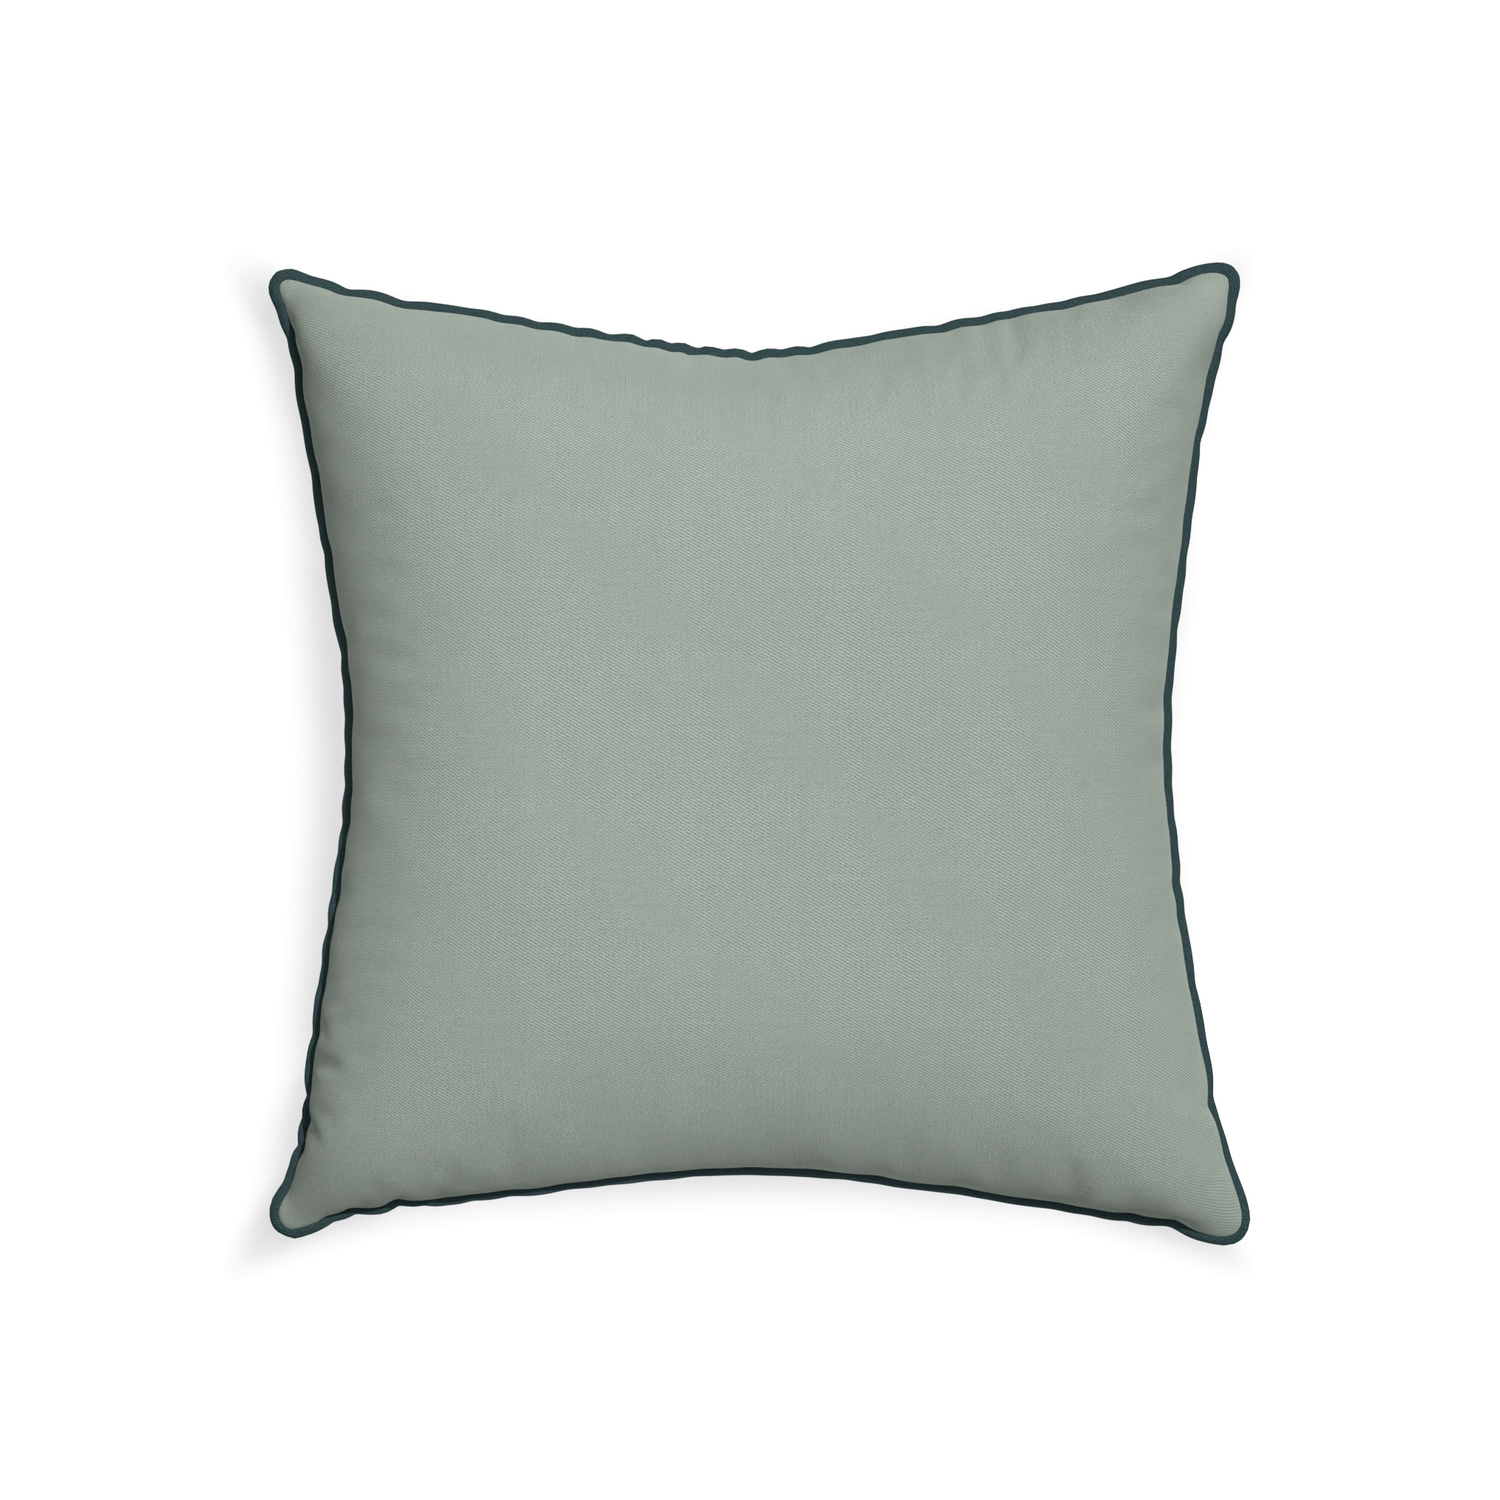 22-square sage custom sage green cottonpillow with p piping on white background